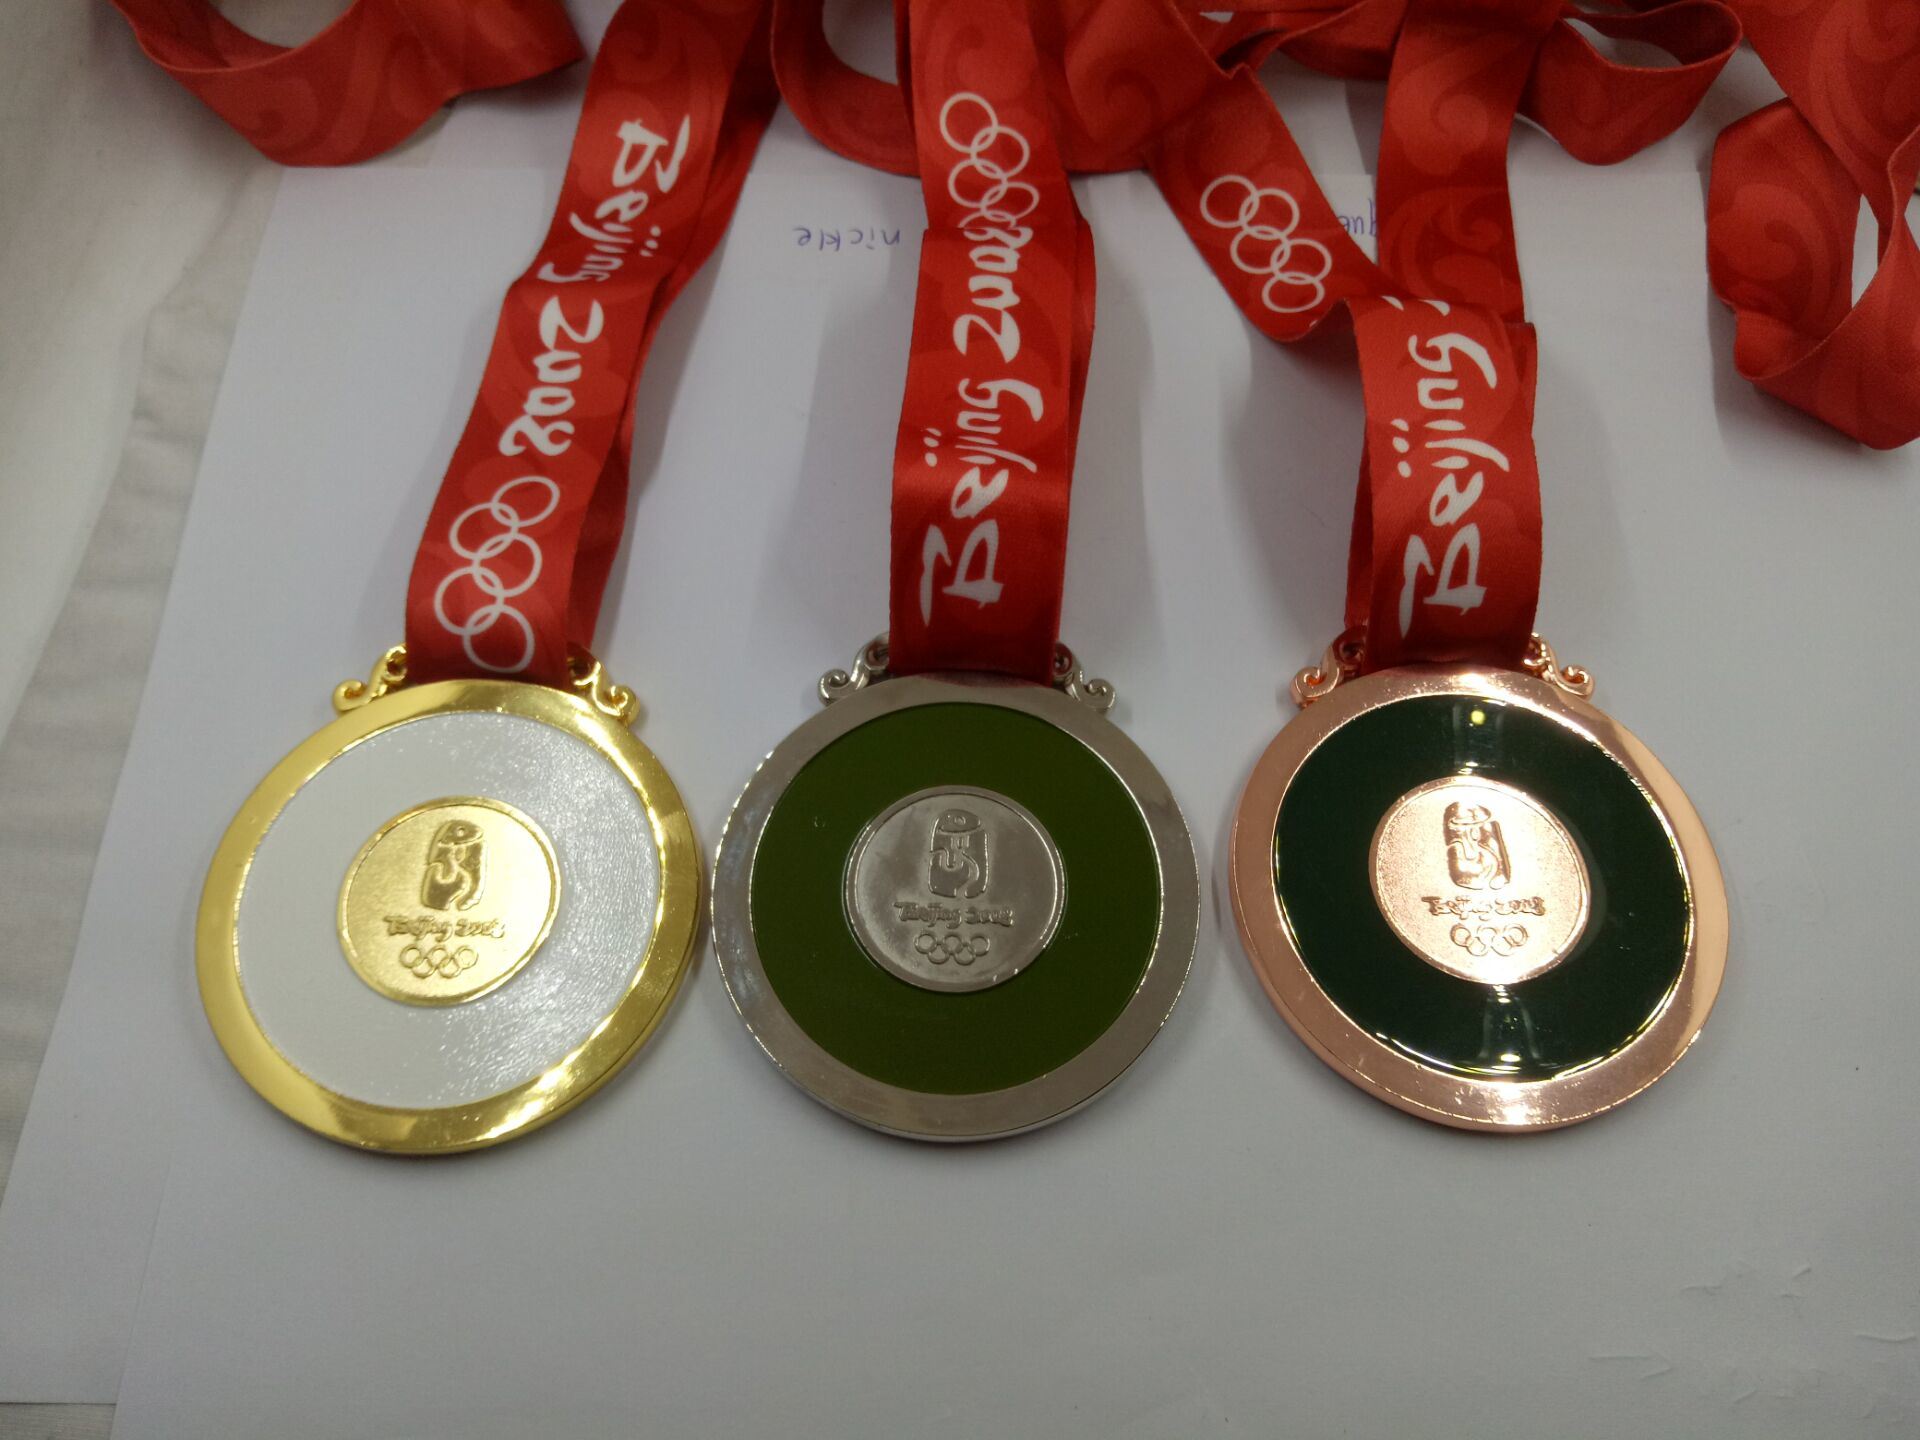 New Design Replica Olympic Gold Medals (XY160914) - Buy Medallions